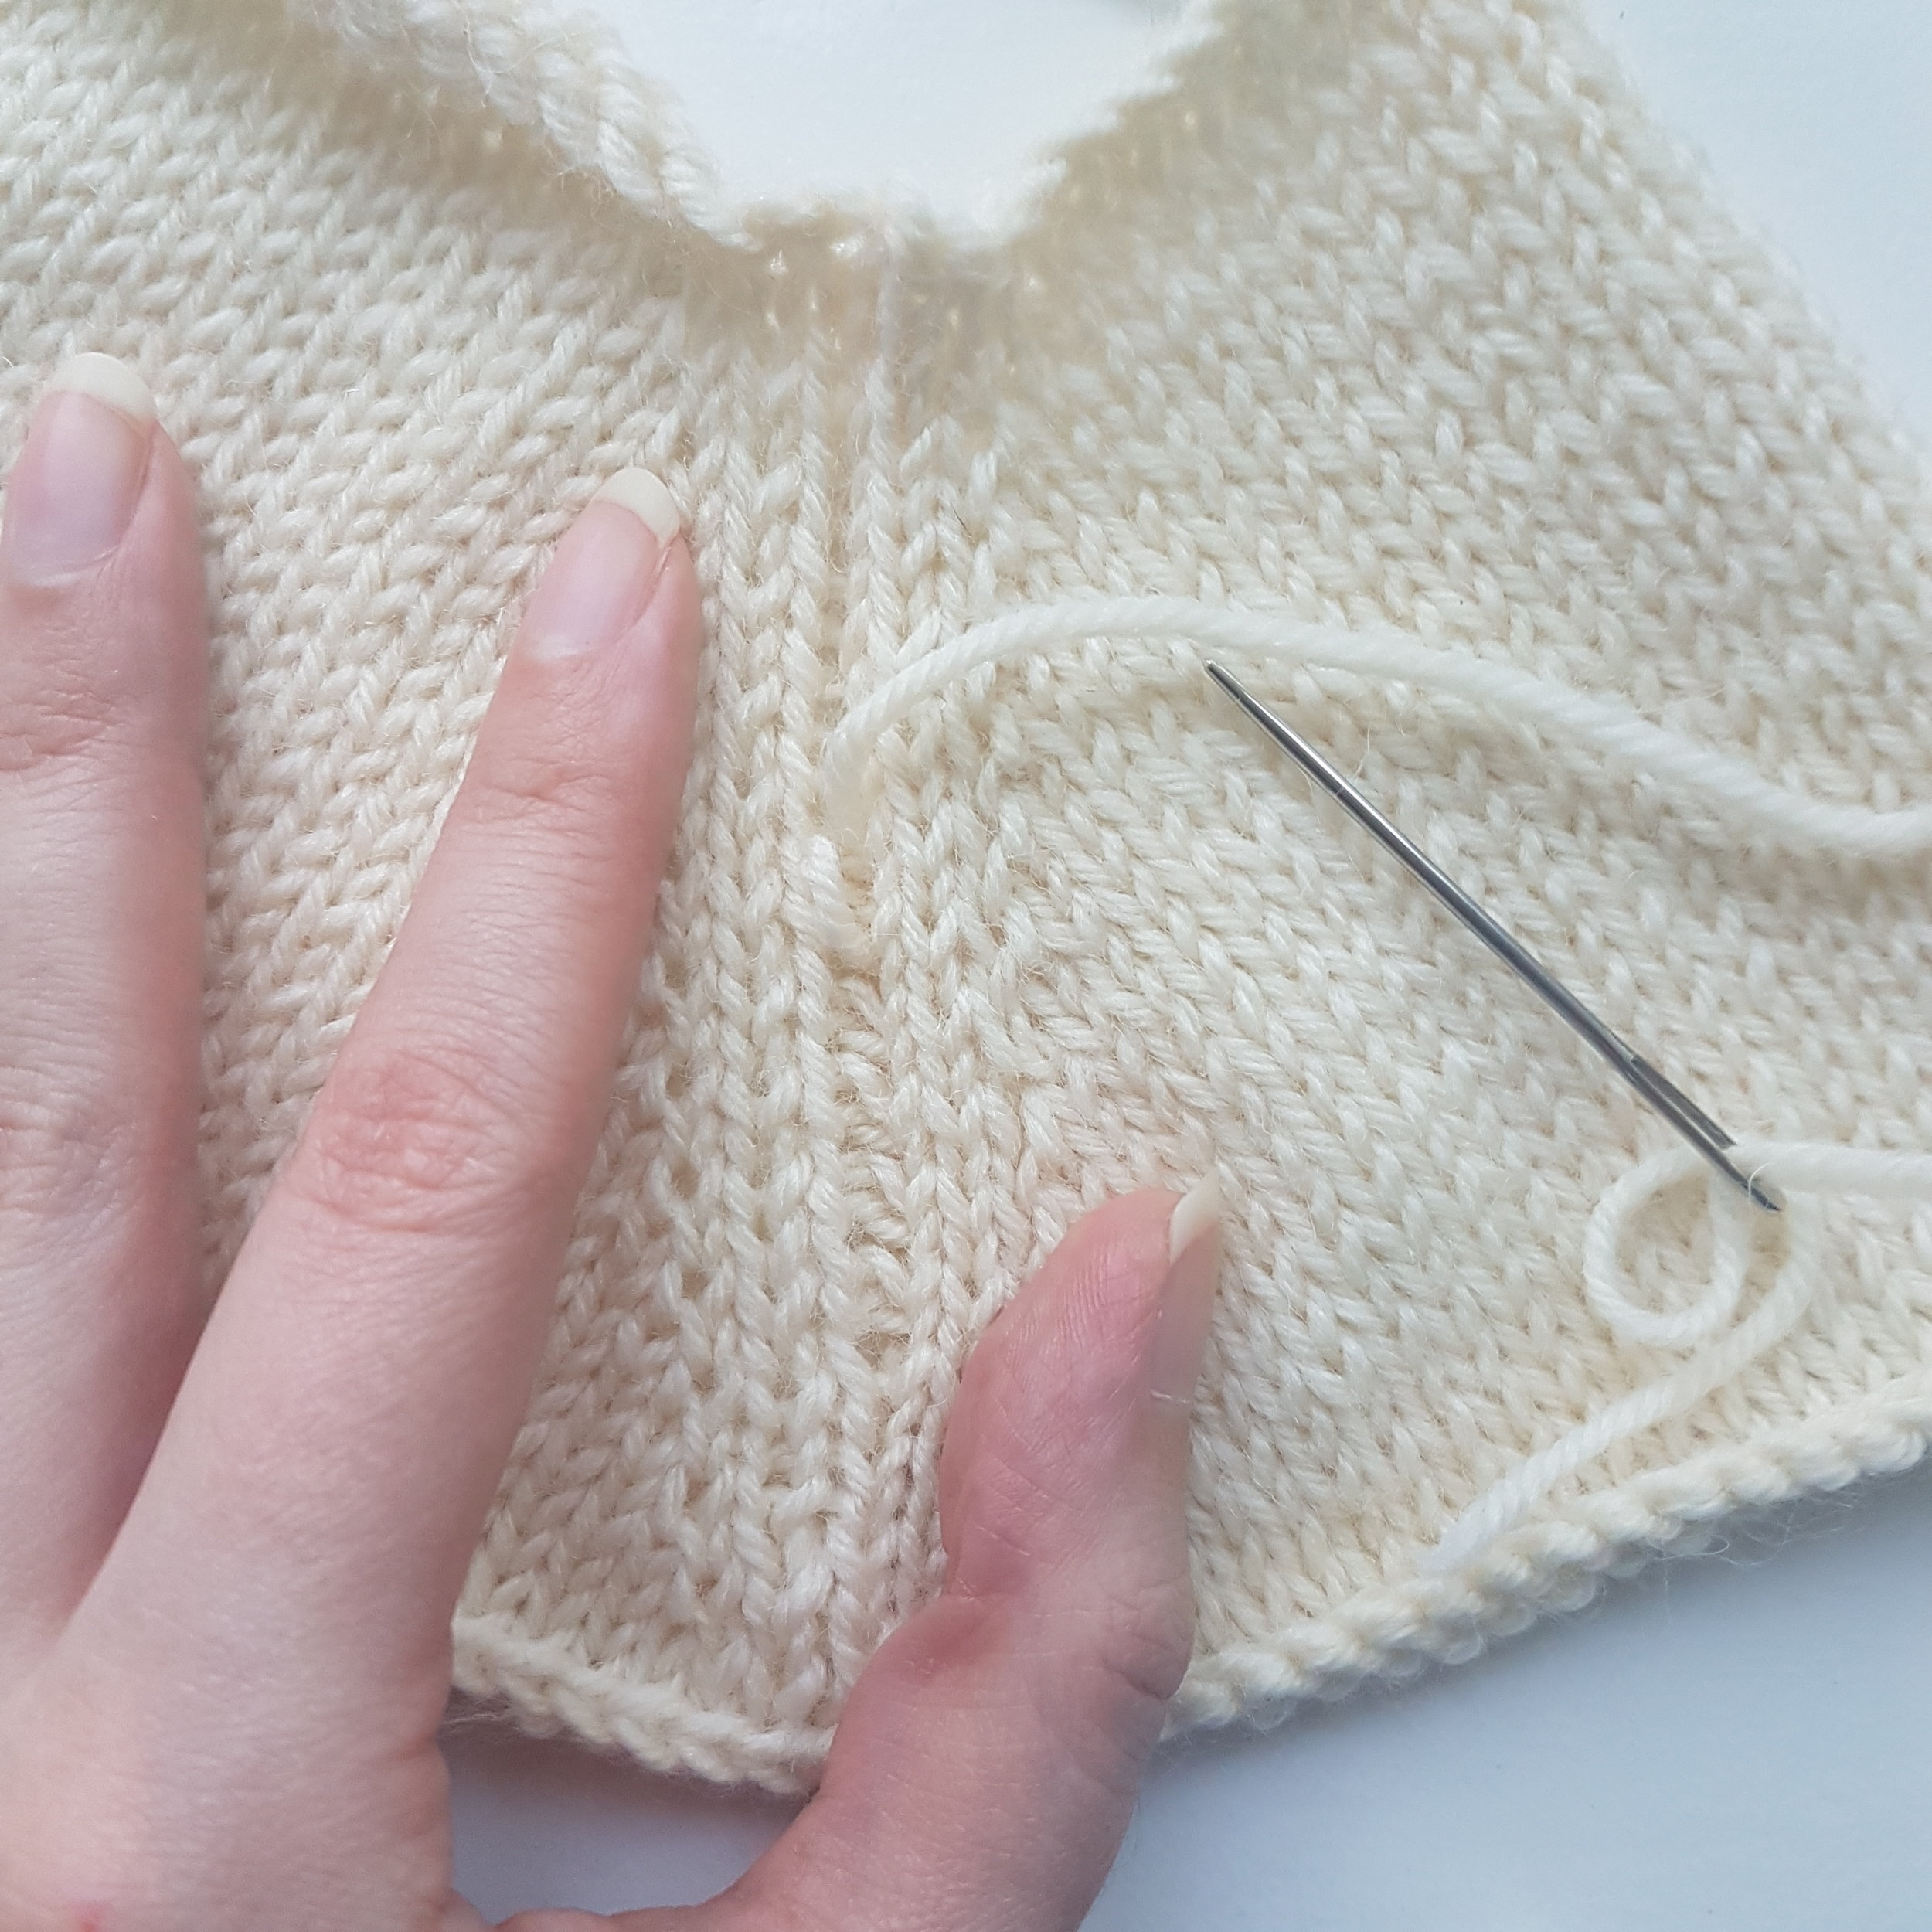 How to Add Stability to a Seamless Sweater